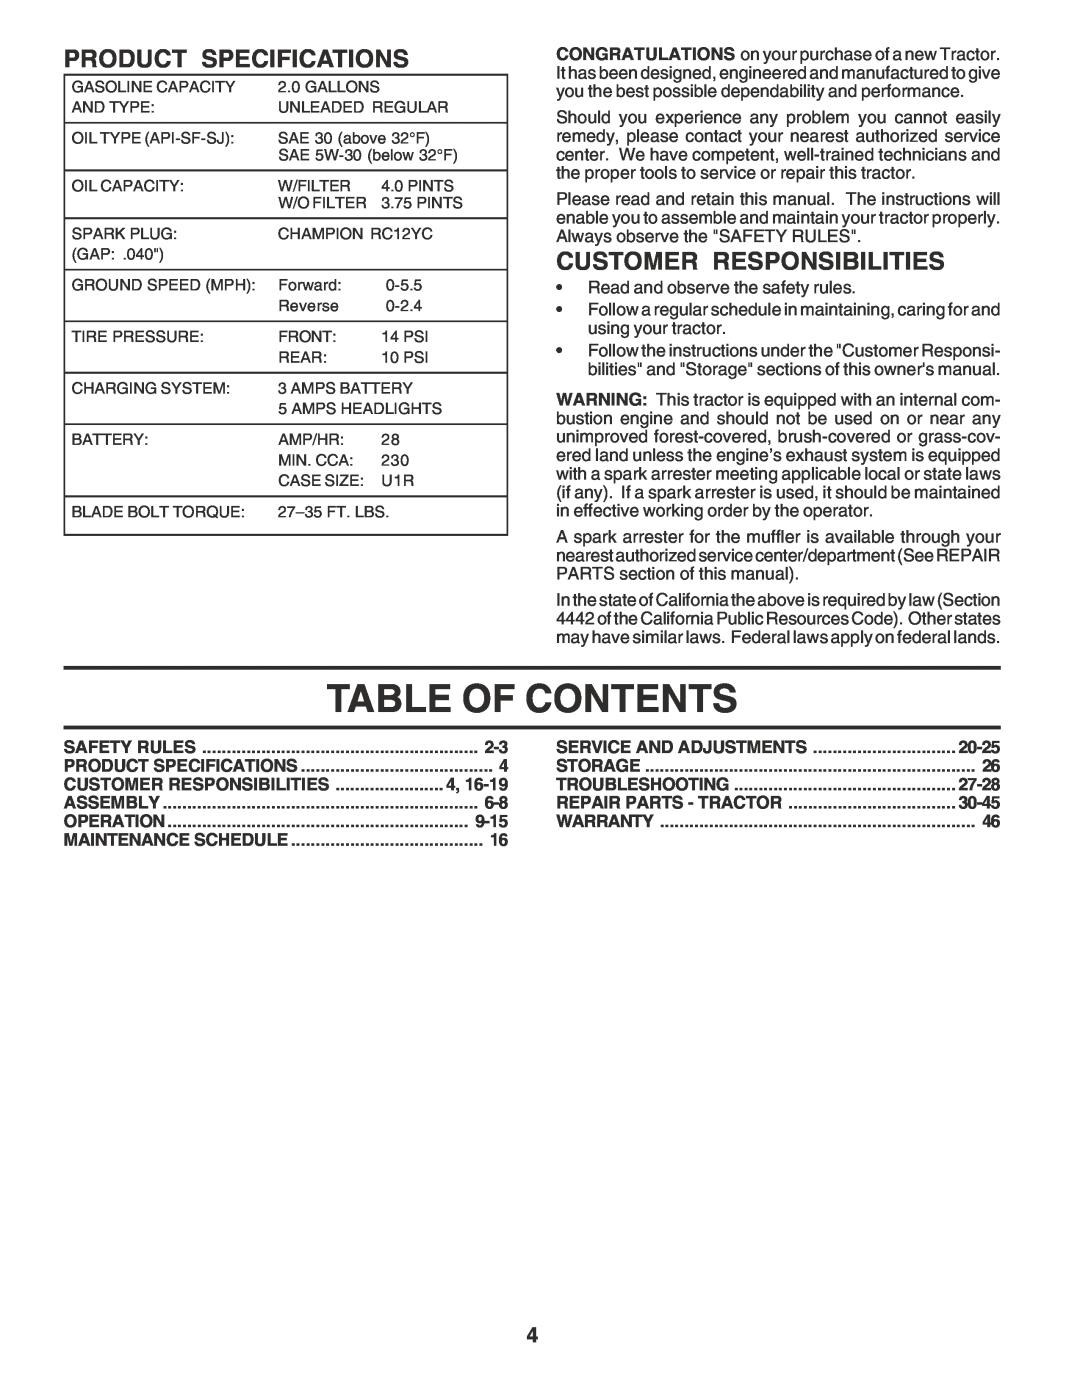 Poulan 182770 owner manual Table Of Contents, Product Specifications, Customer Responsibilities 